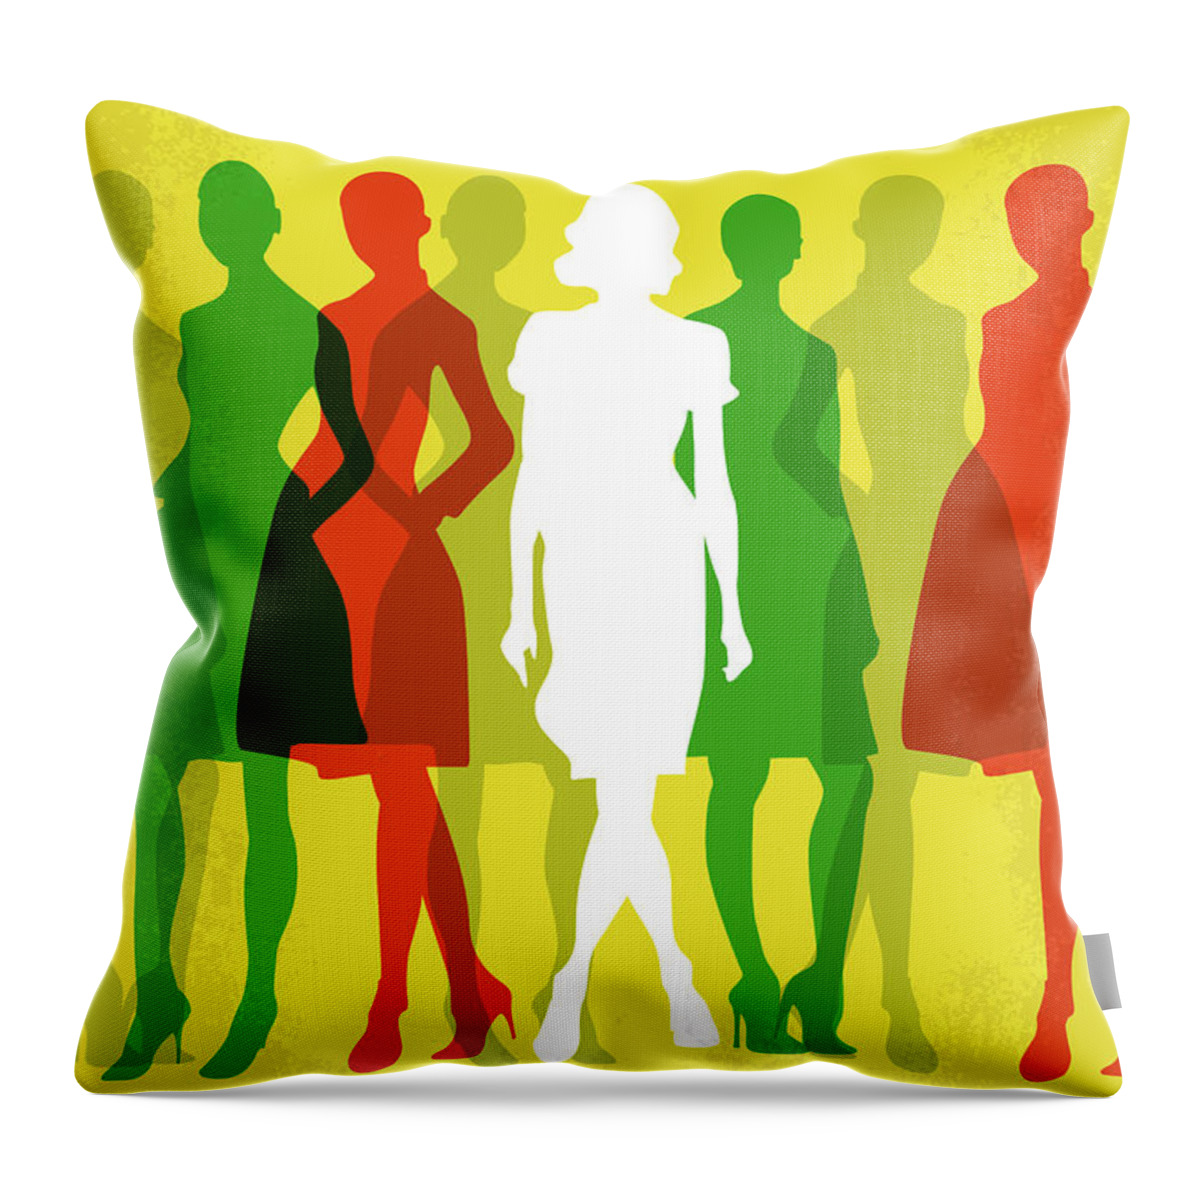 Mannequin Throw Pillow featuring the digital art No984 My Mannequin minimal movie poster by Chungkong Art